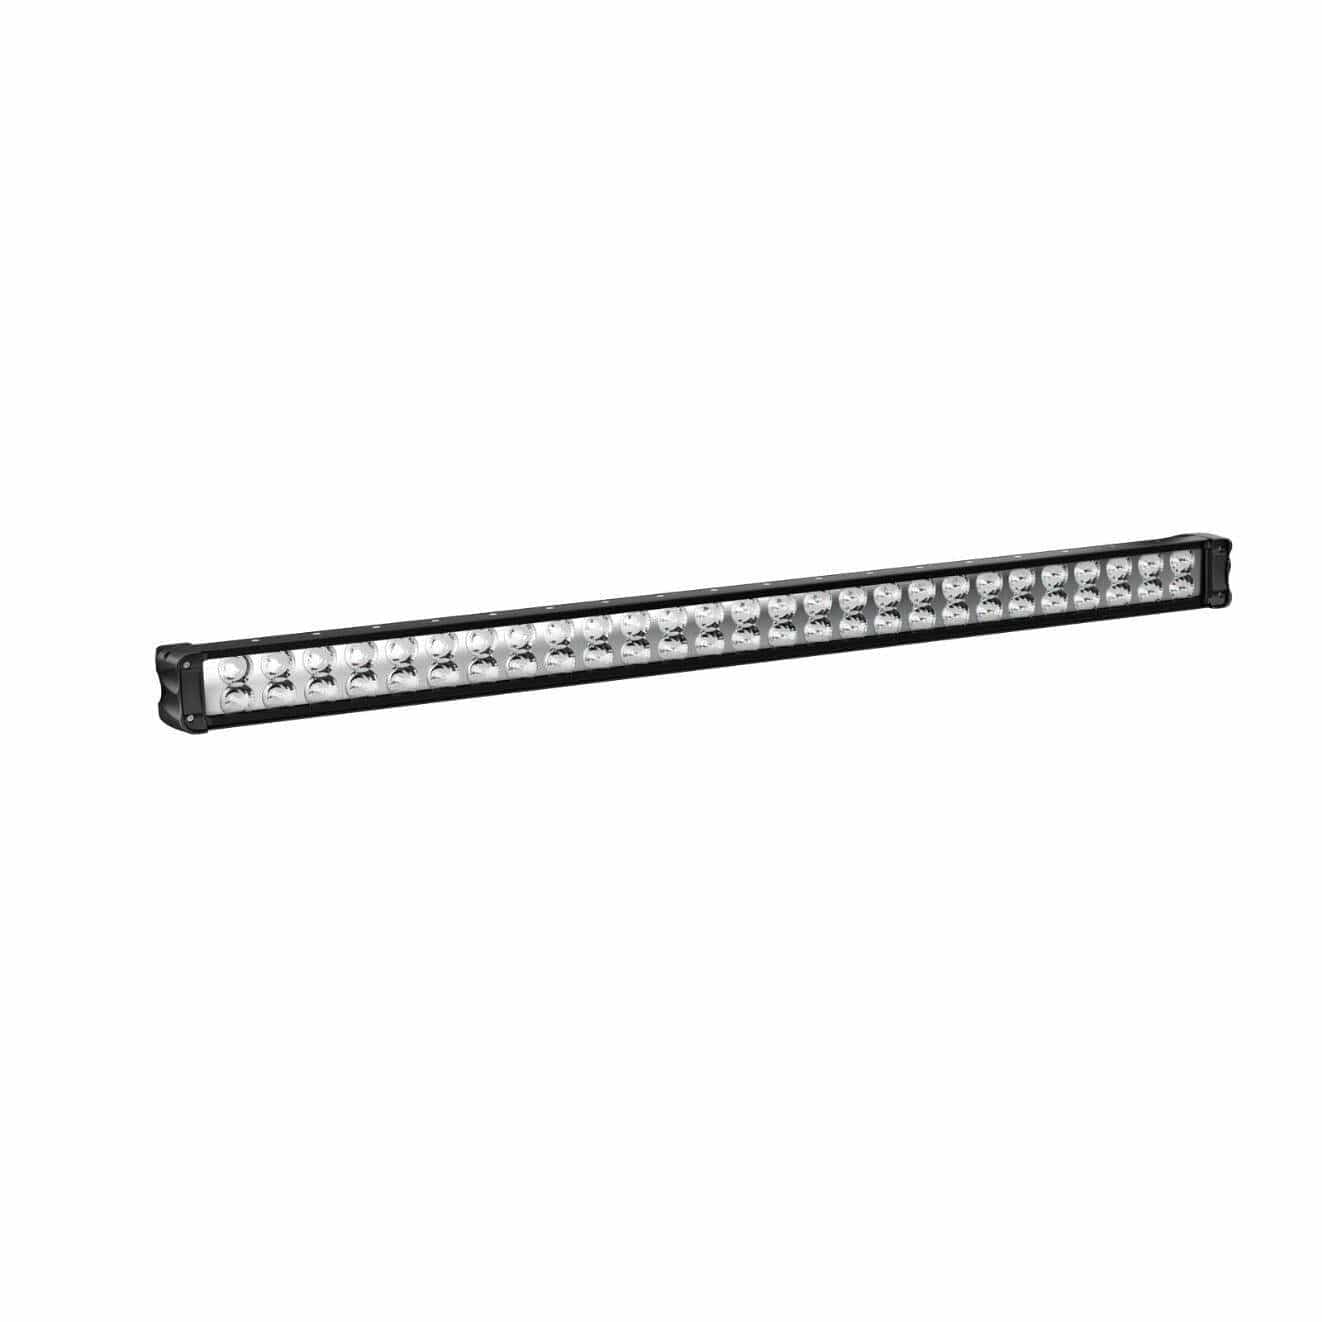 39" (99 cm) Double Stacked LED Light Bar (270W) - Factory Recreation